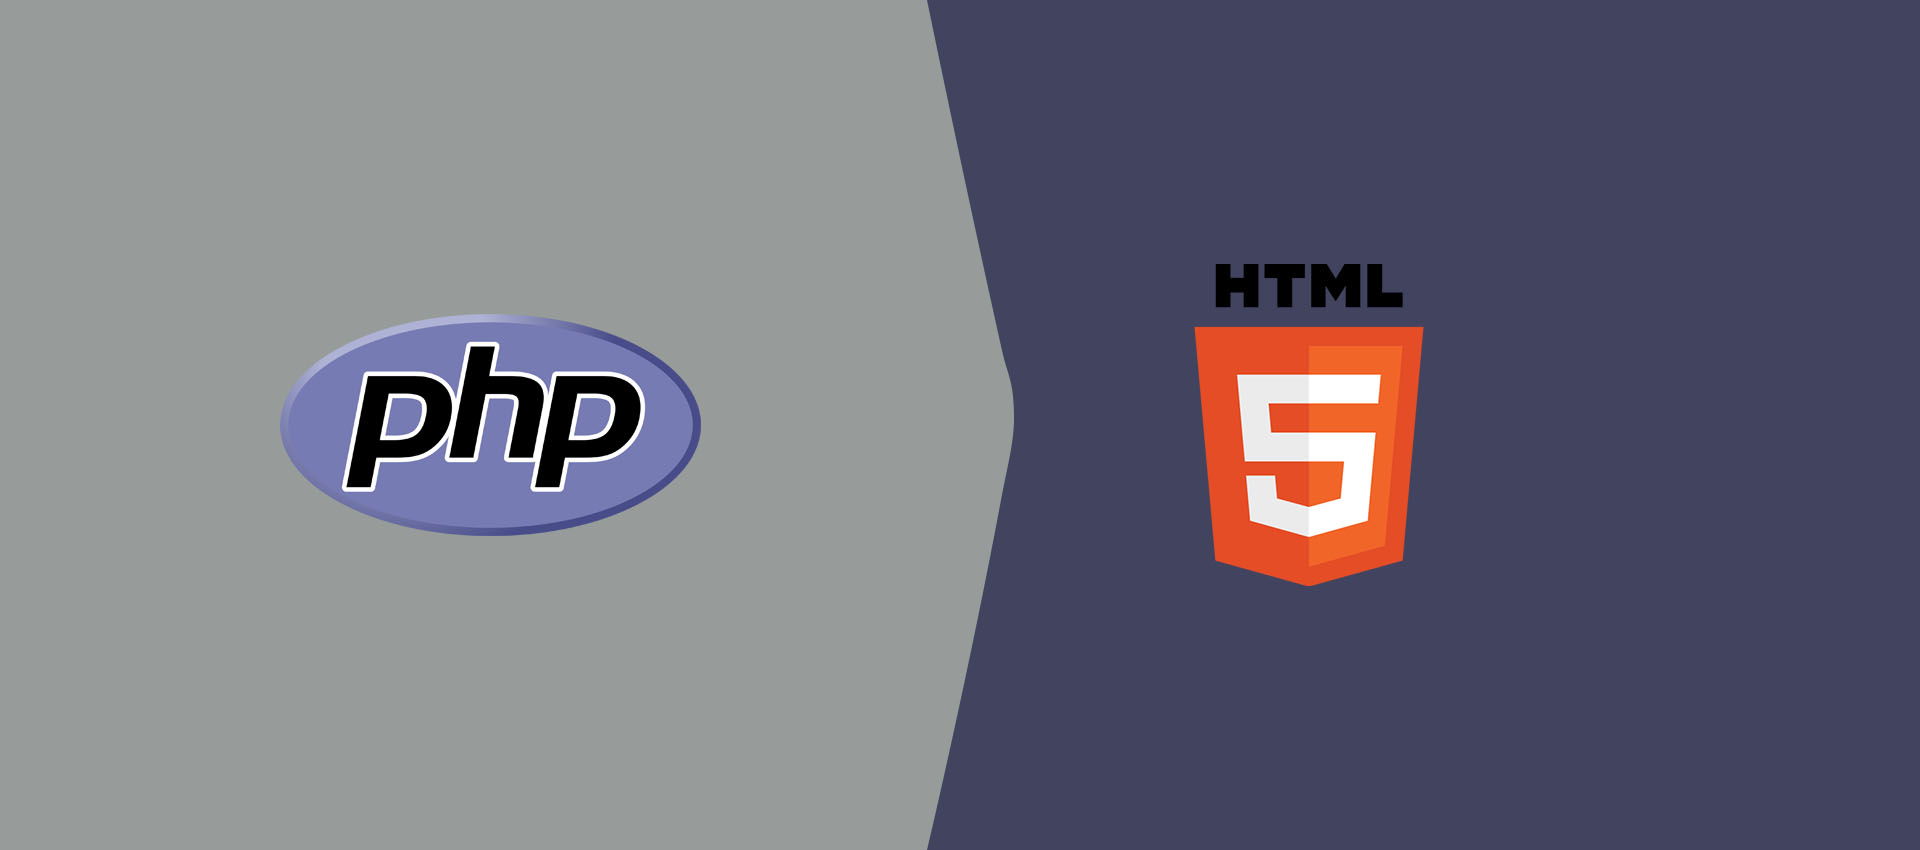 htmlentities vs htmlspecialchars in PHP